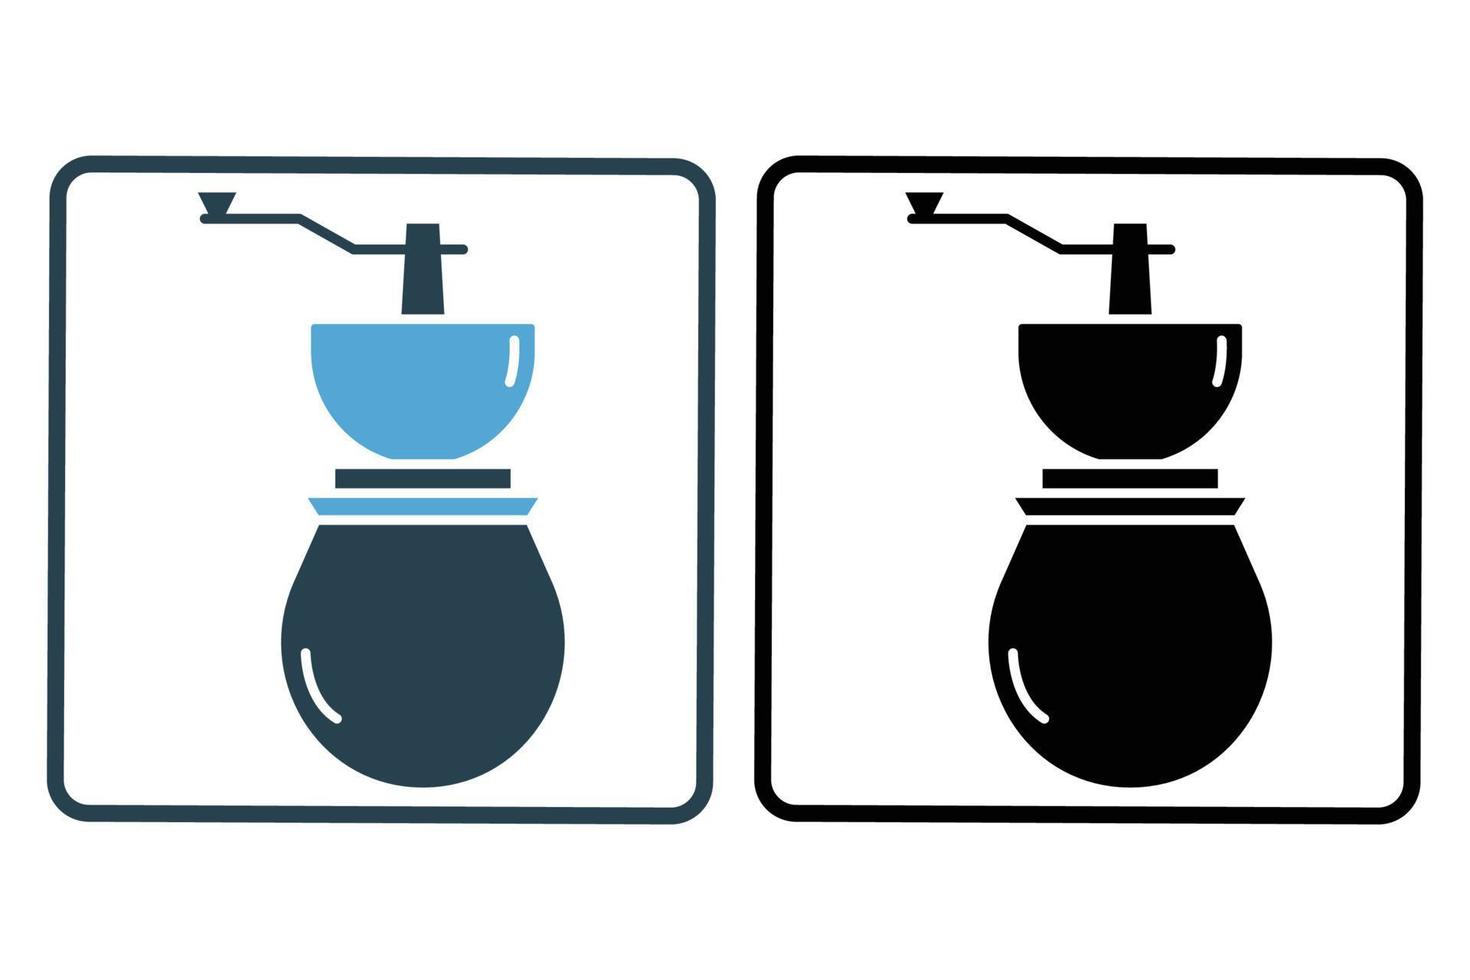 Coffee grinder icon illustration. icon related to coffee element. Solid icon style. Simple vector design editable